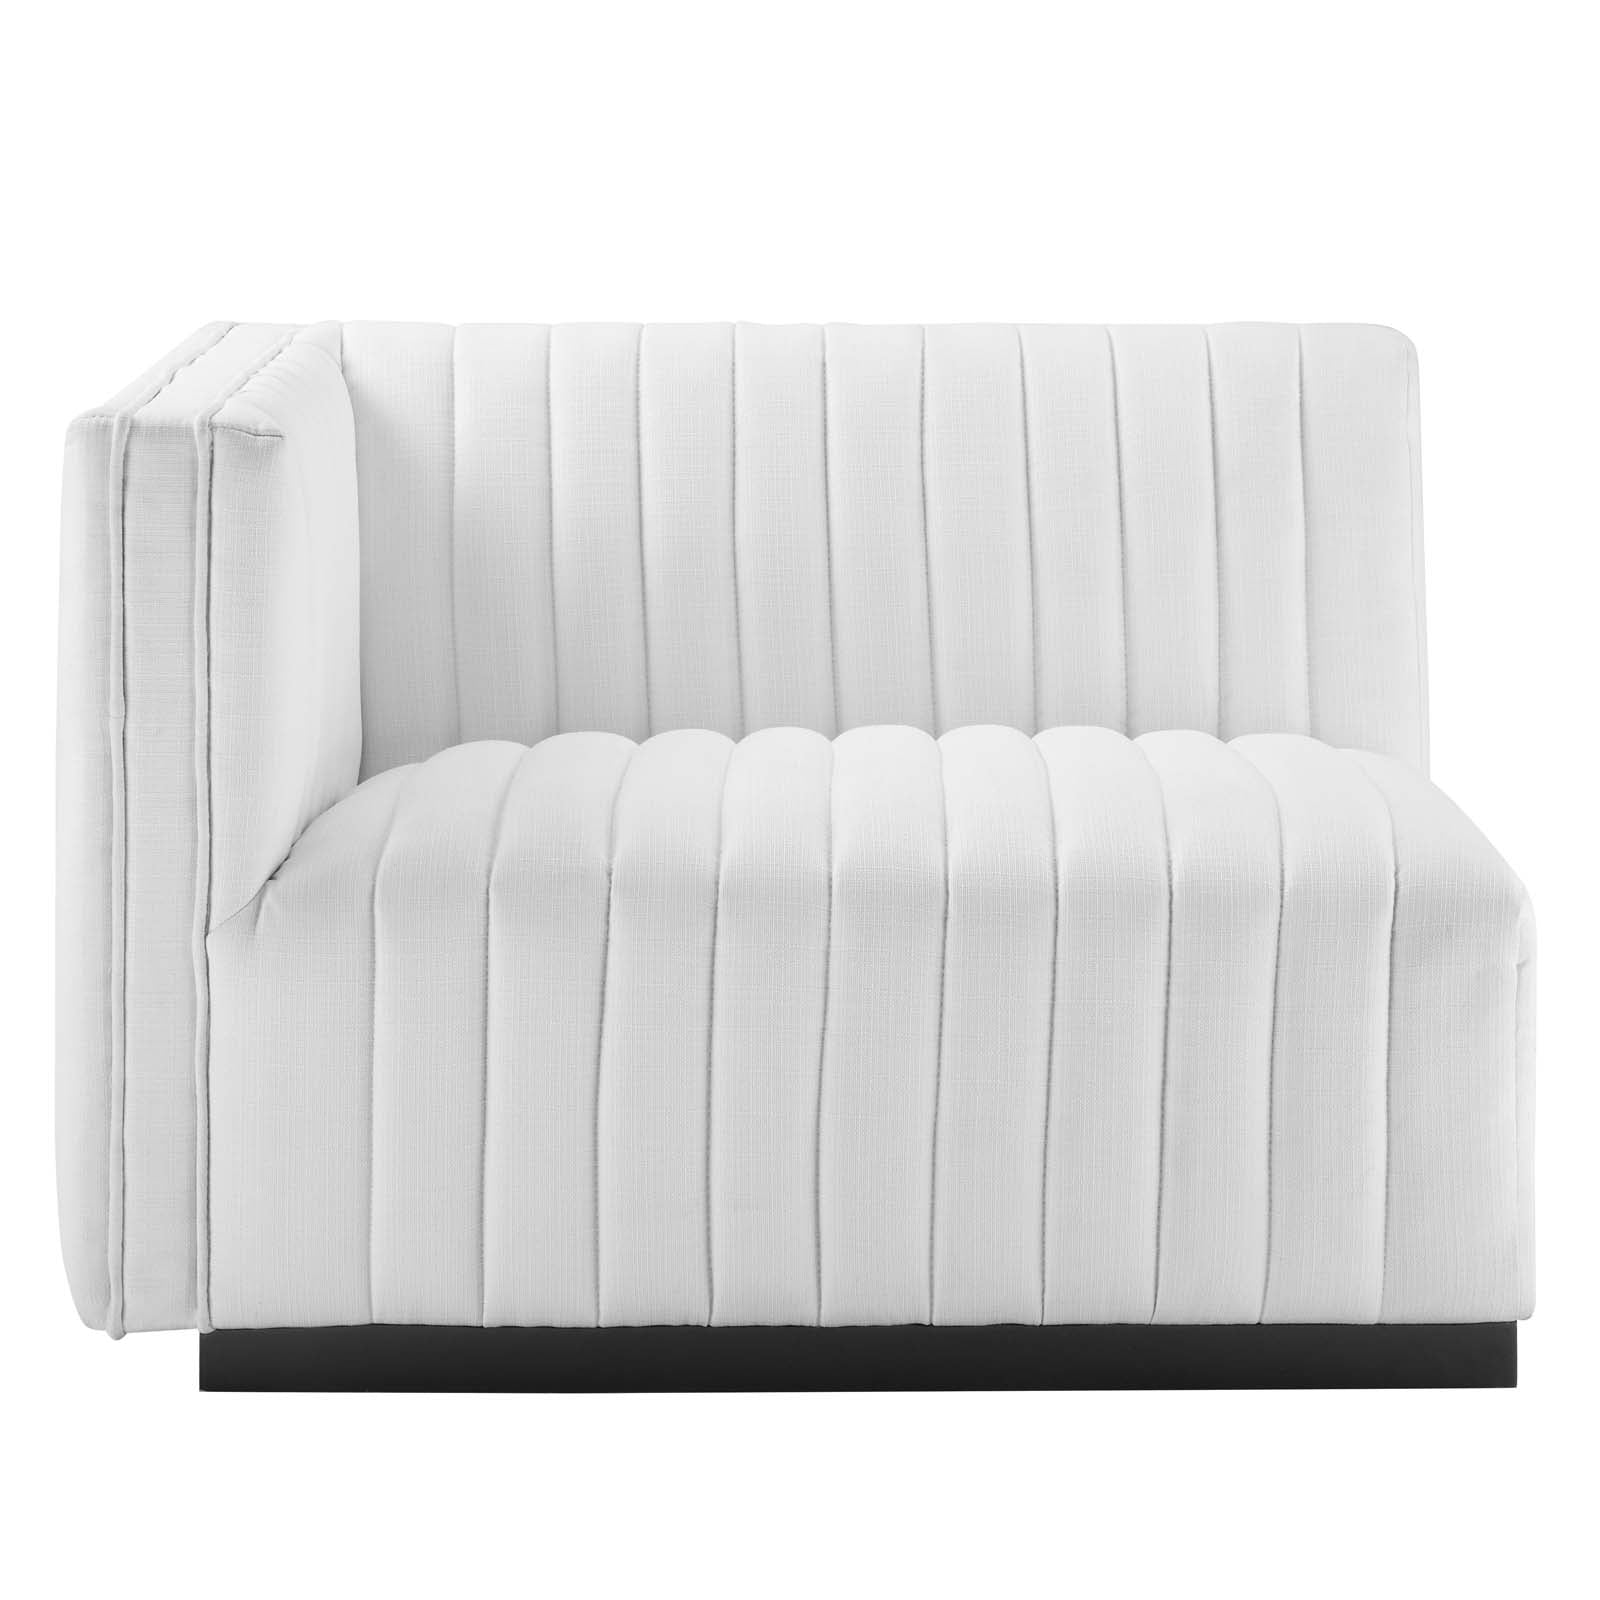 Modway Sofas & Couches - Conjure Channel Tufted Upholstered Fabric 4-Piece Sofa Black White